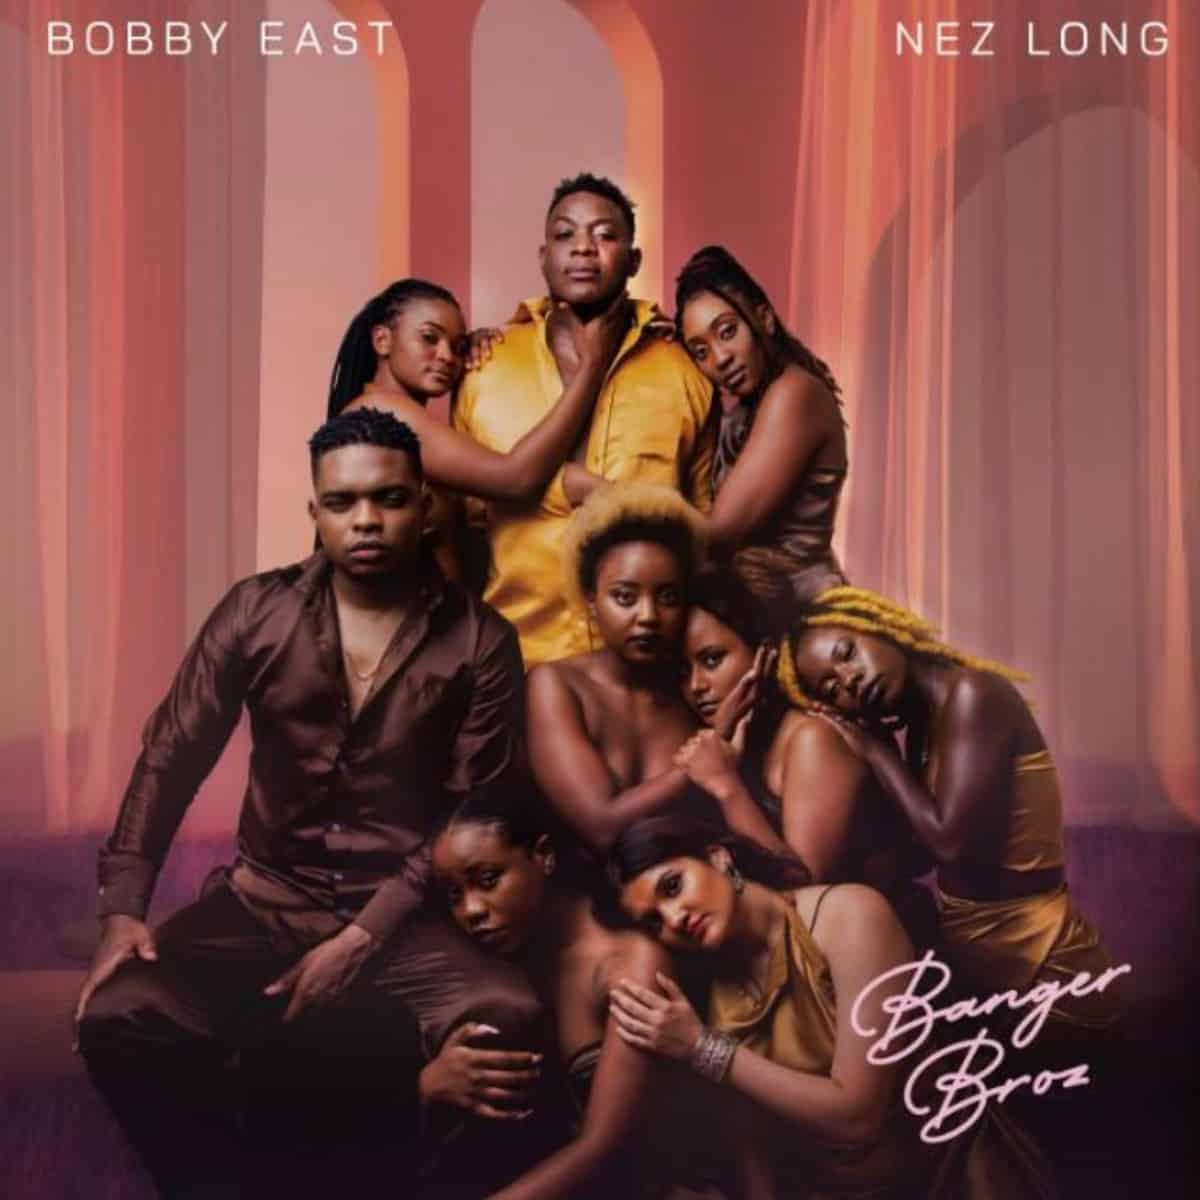 DOWNLOAD: Bobby East & Nez Long – “Top Of The World” Mp3